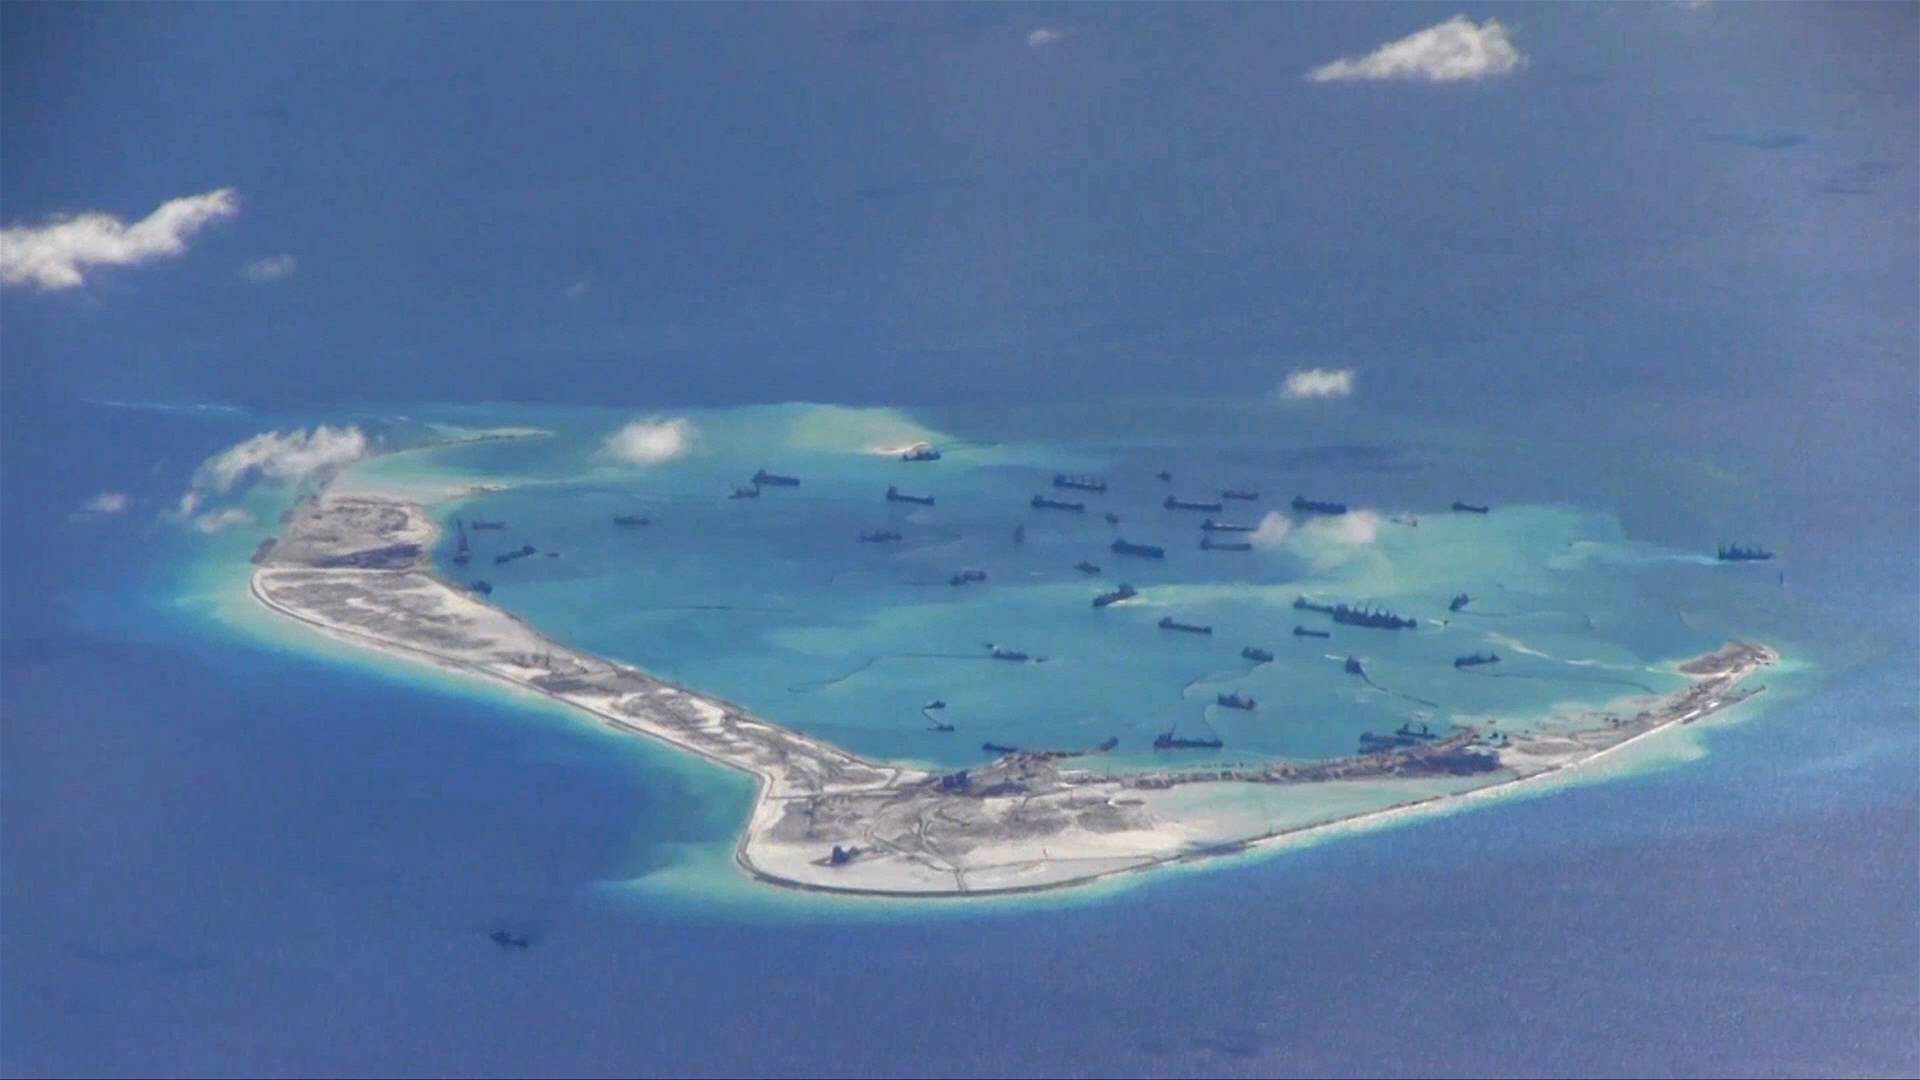 G7 opposes China&#39;s &#39;dangerous&#39; South China Sea forays